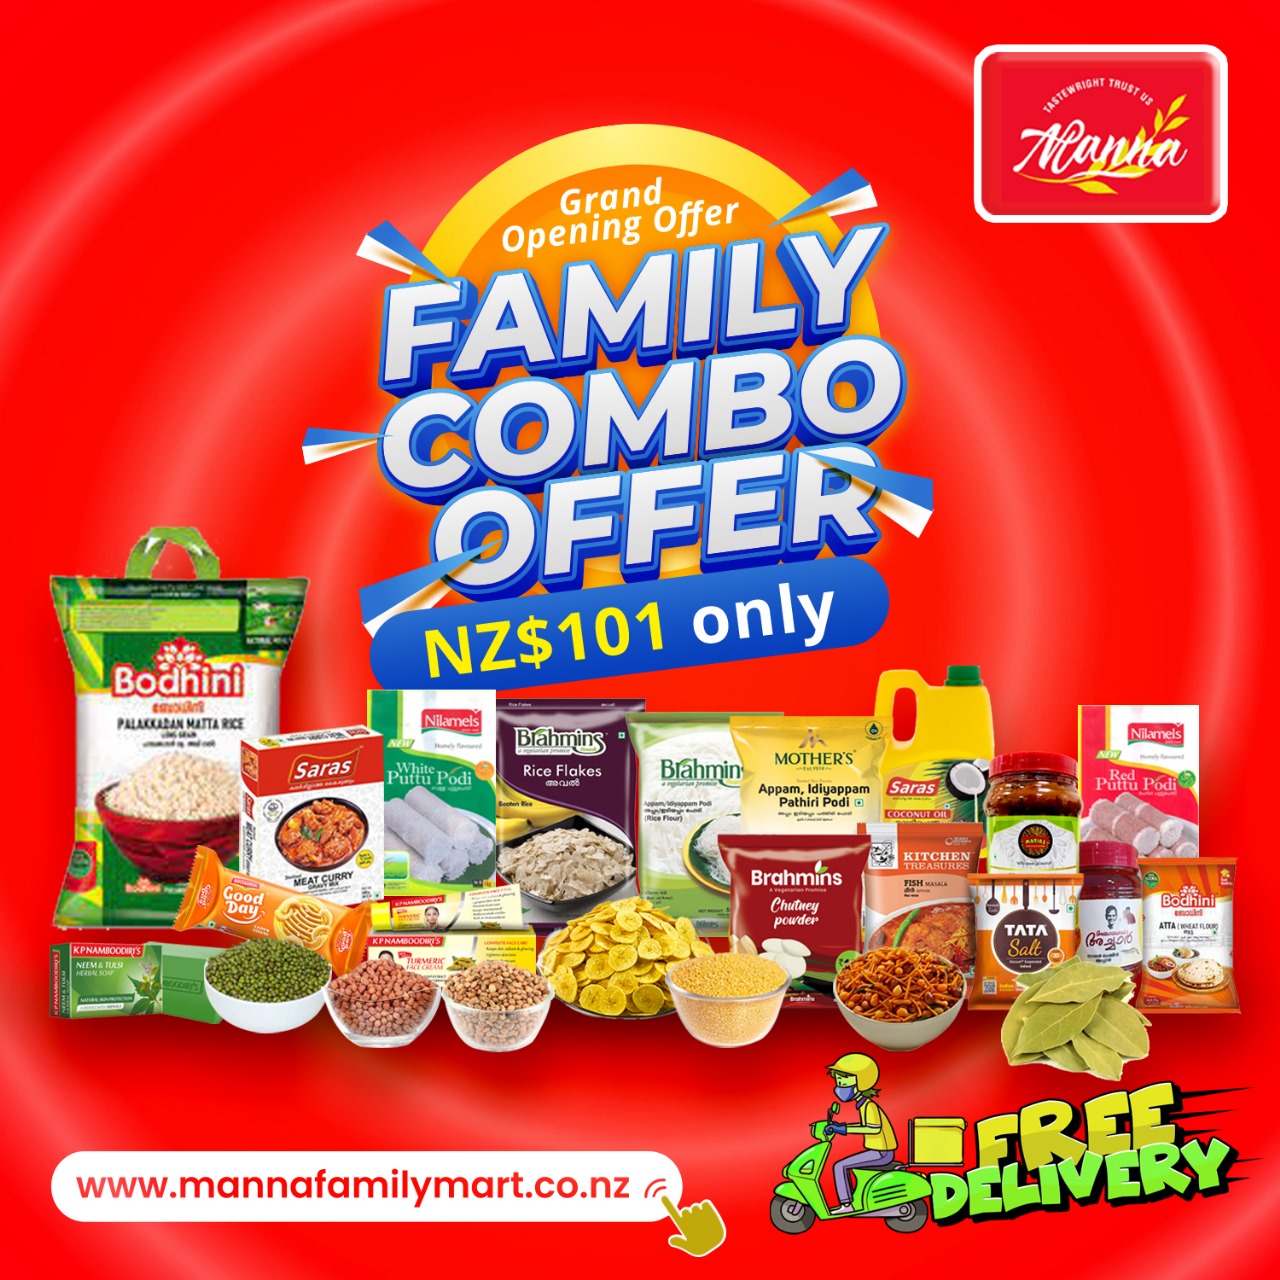 FAMILY COMBO OFFER NZ$101 ONLY! – Manna Family Mart